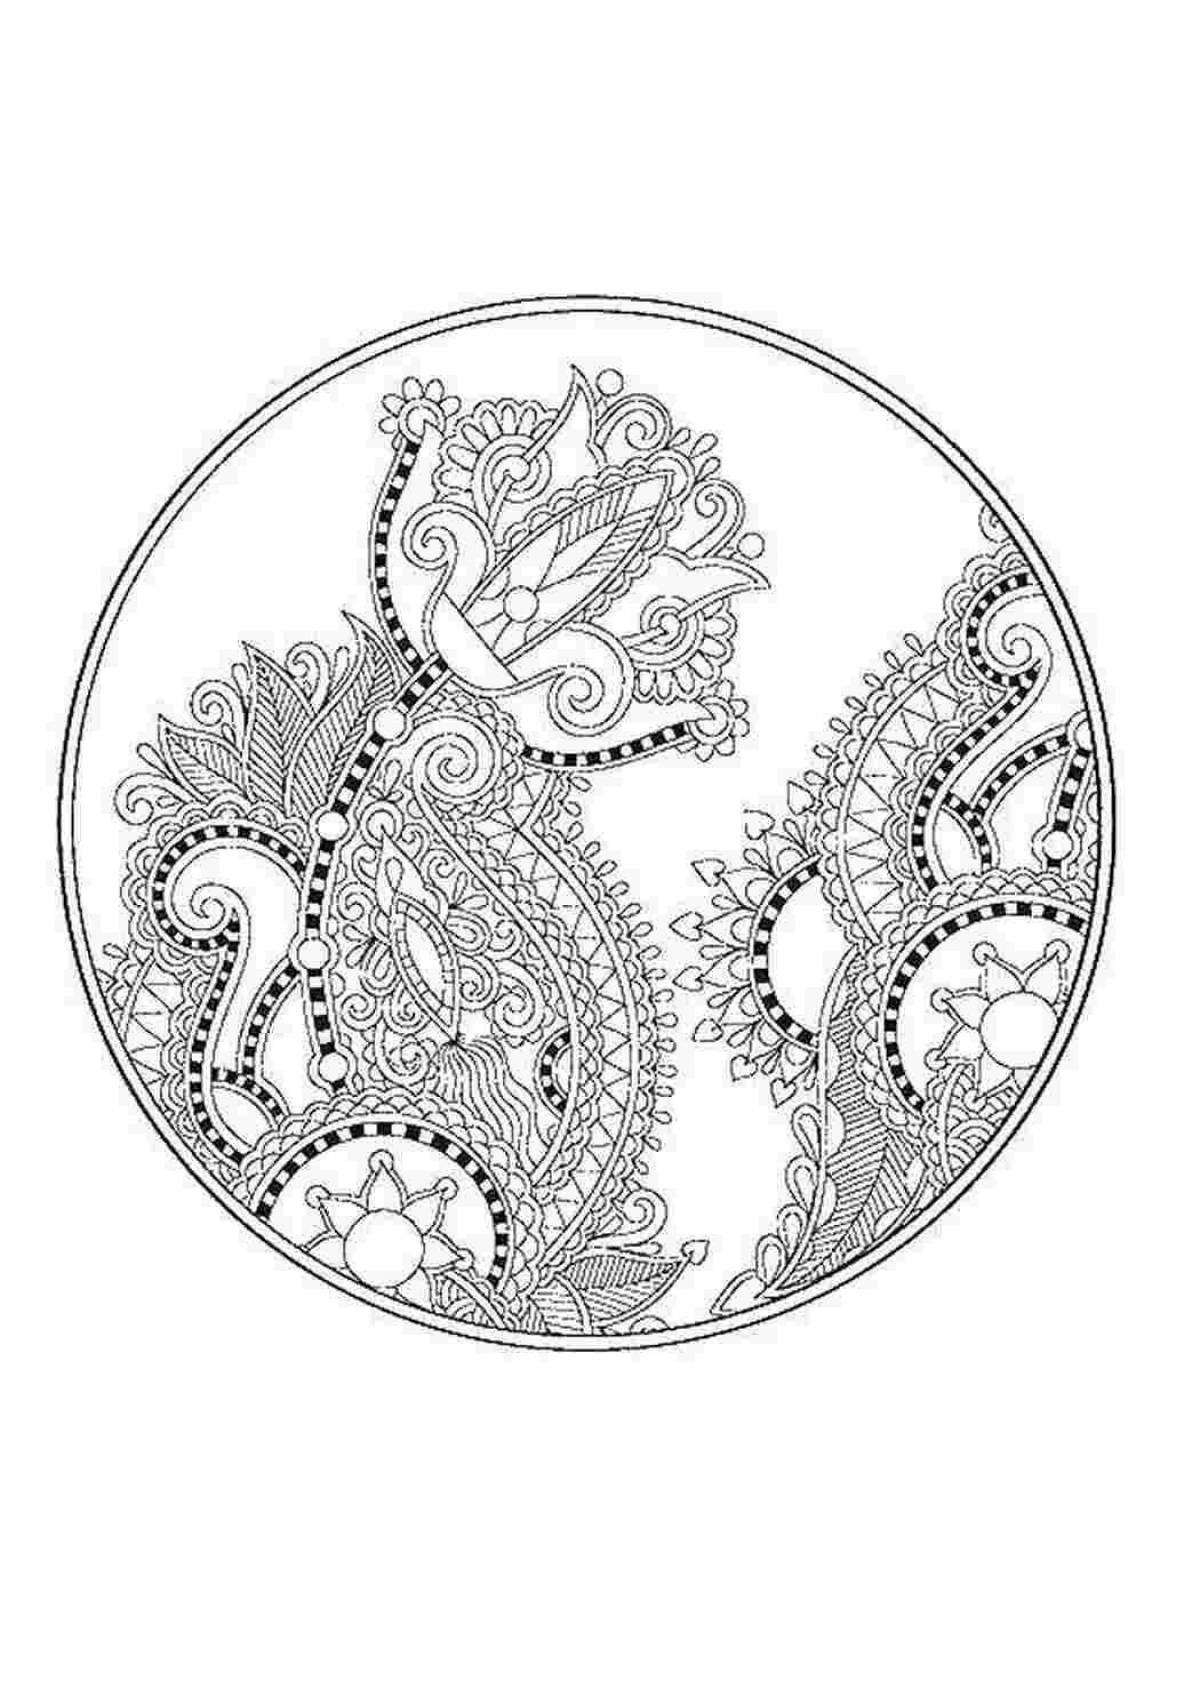 Coloring pages magical patterns